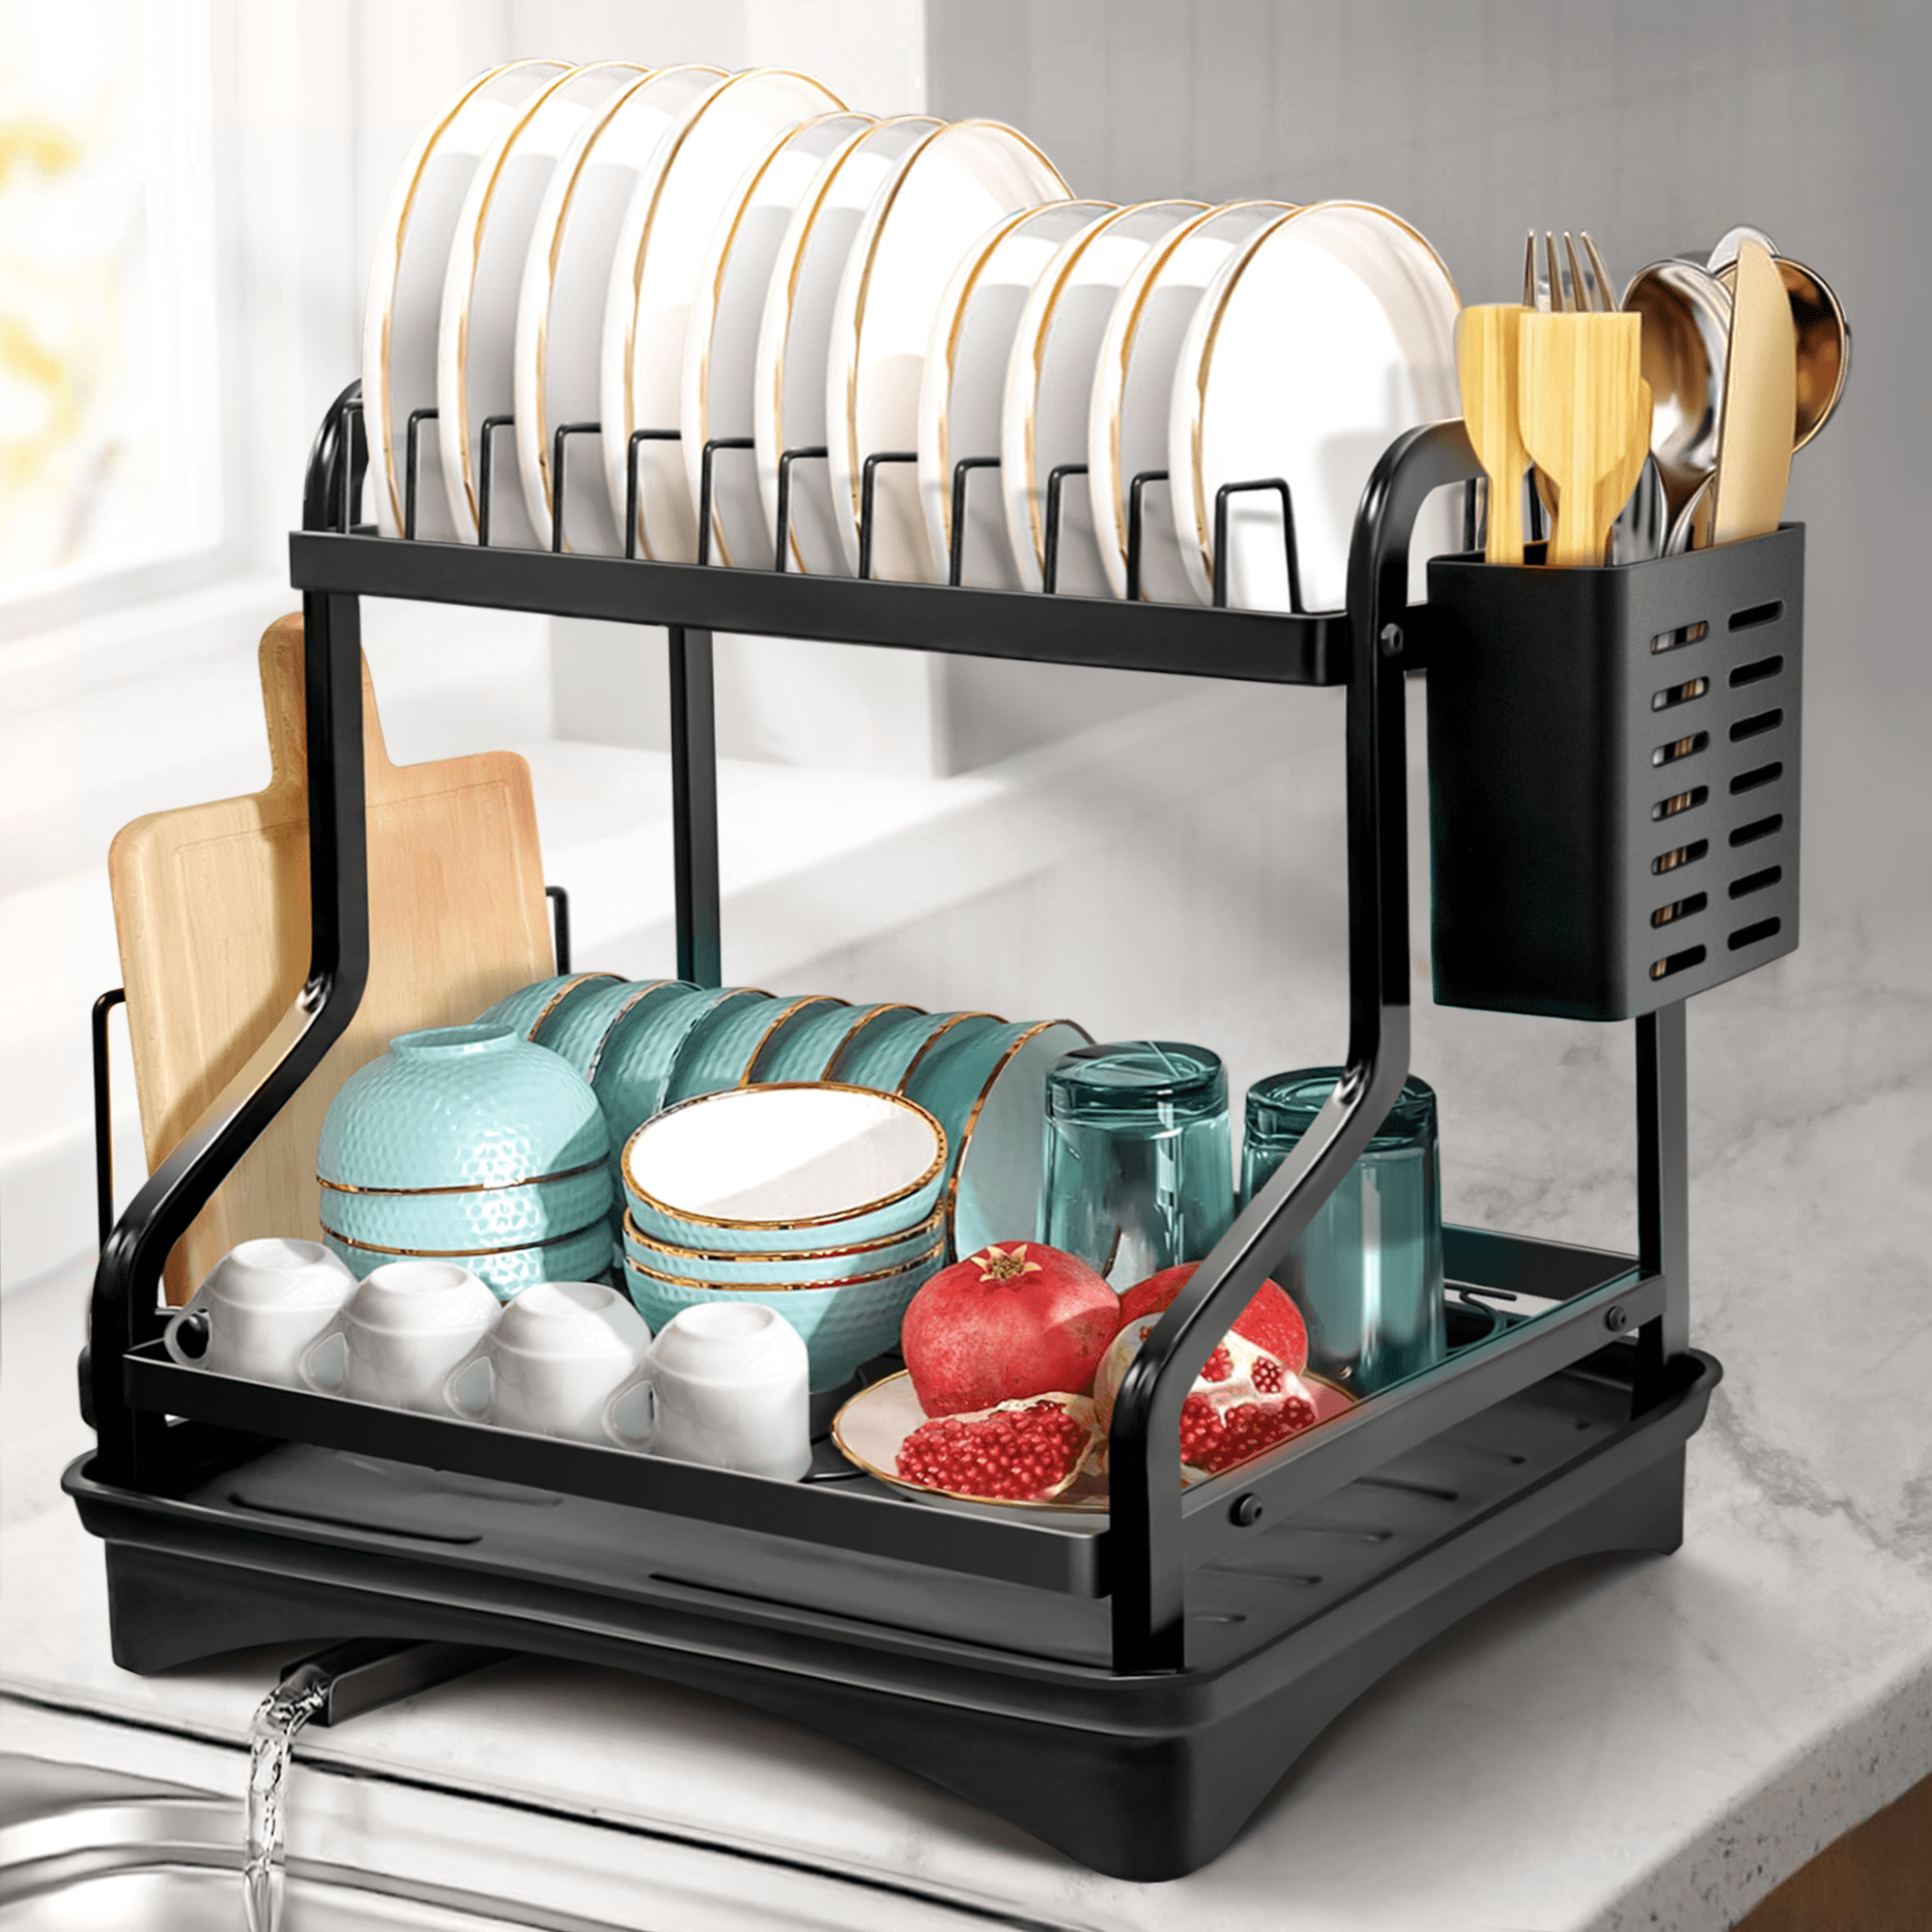 MERRYBOX Dish Drying Rack Large Capacity 2 Tier Dish Drying Rack  Multifunctional Rustproof Dish Drainers for Kitchen Counter with Drainboard